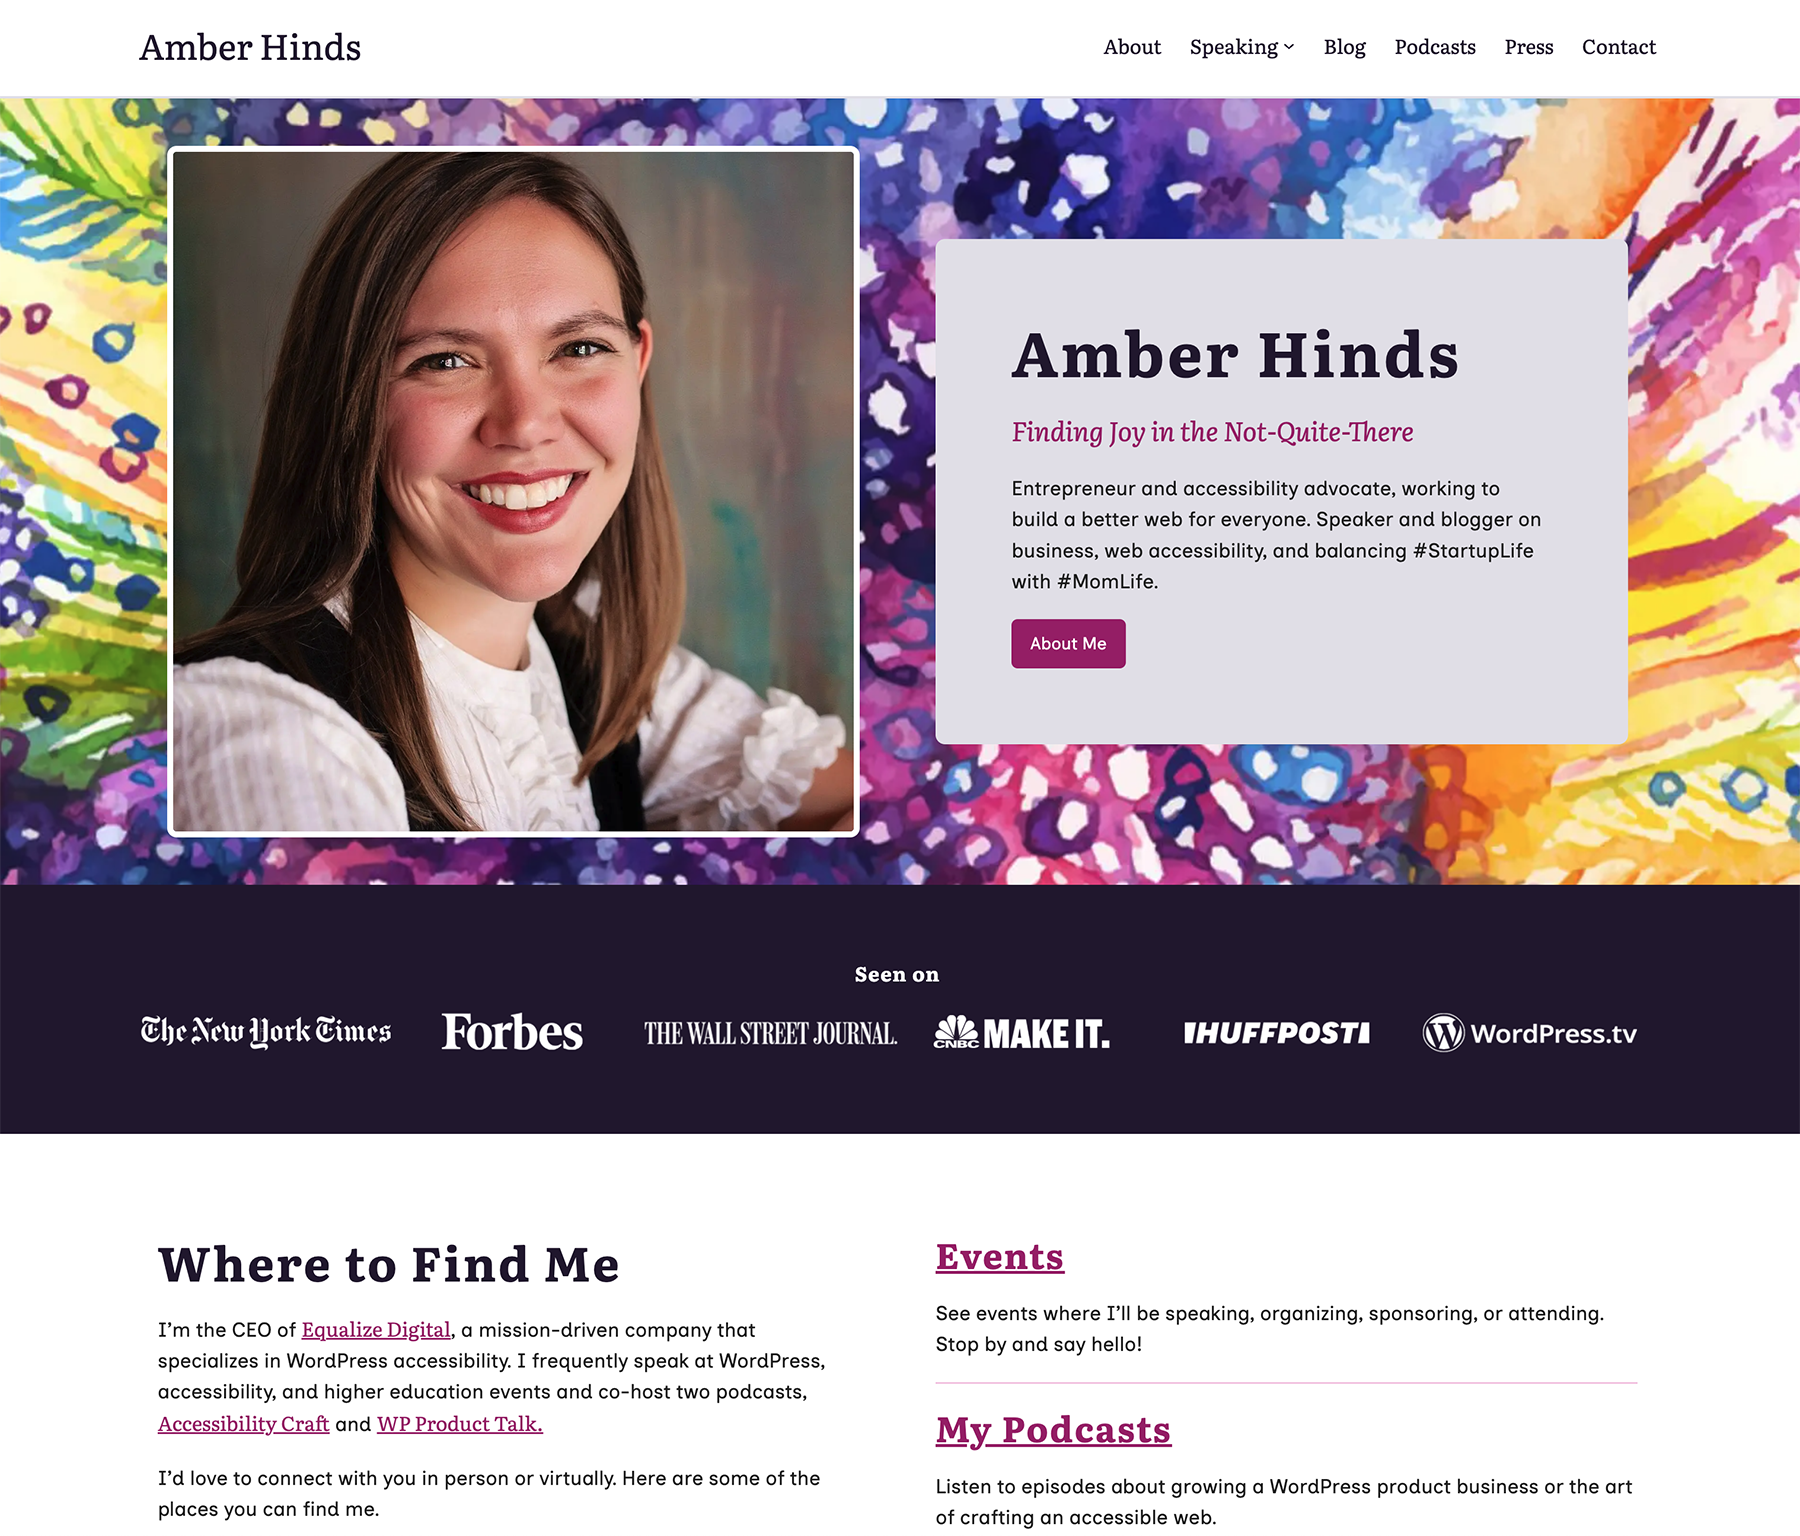 New website has Amber's name to the left and navigation menu to the right (instead of split), a similar home page hero as the old website but with no overlapping elements.